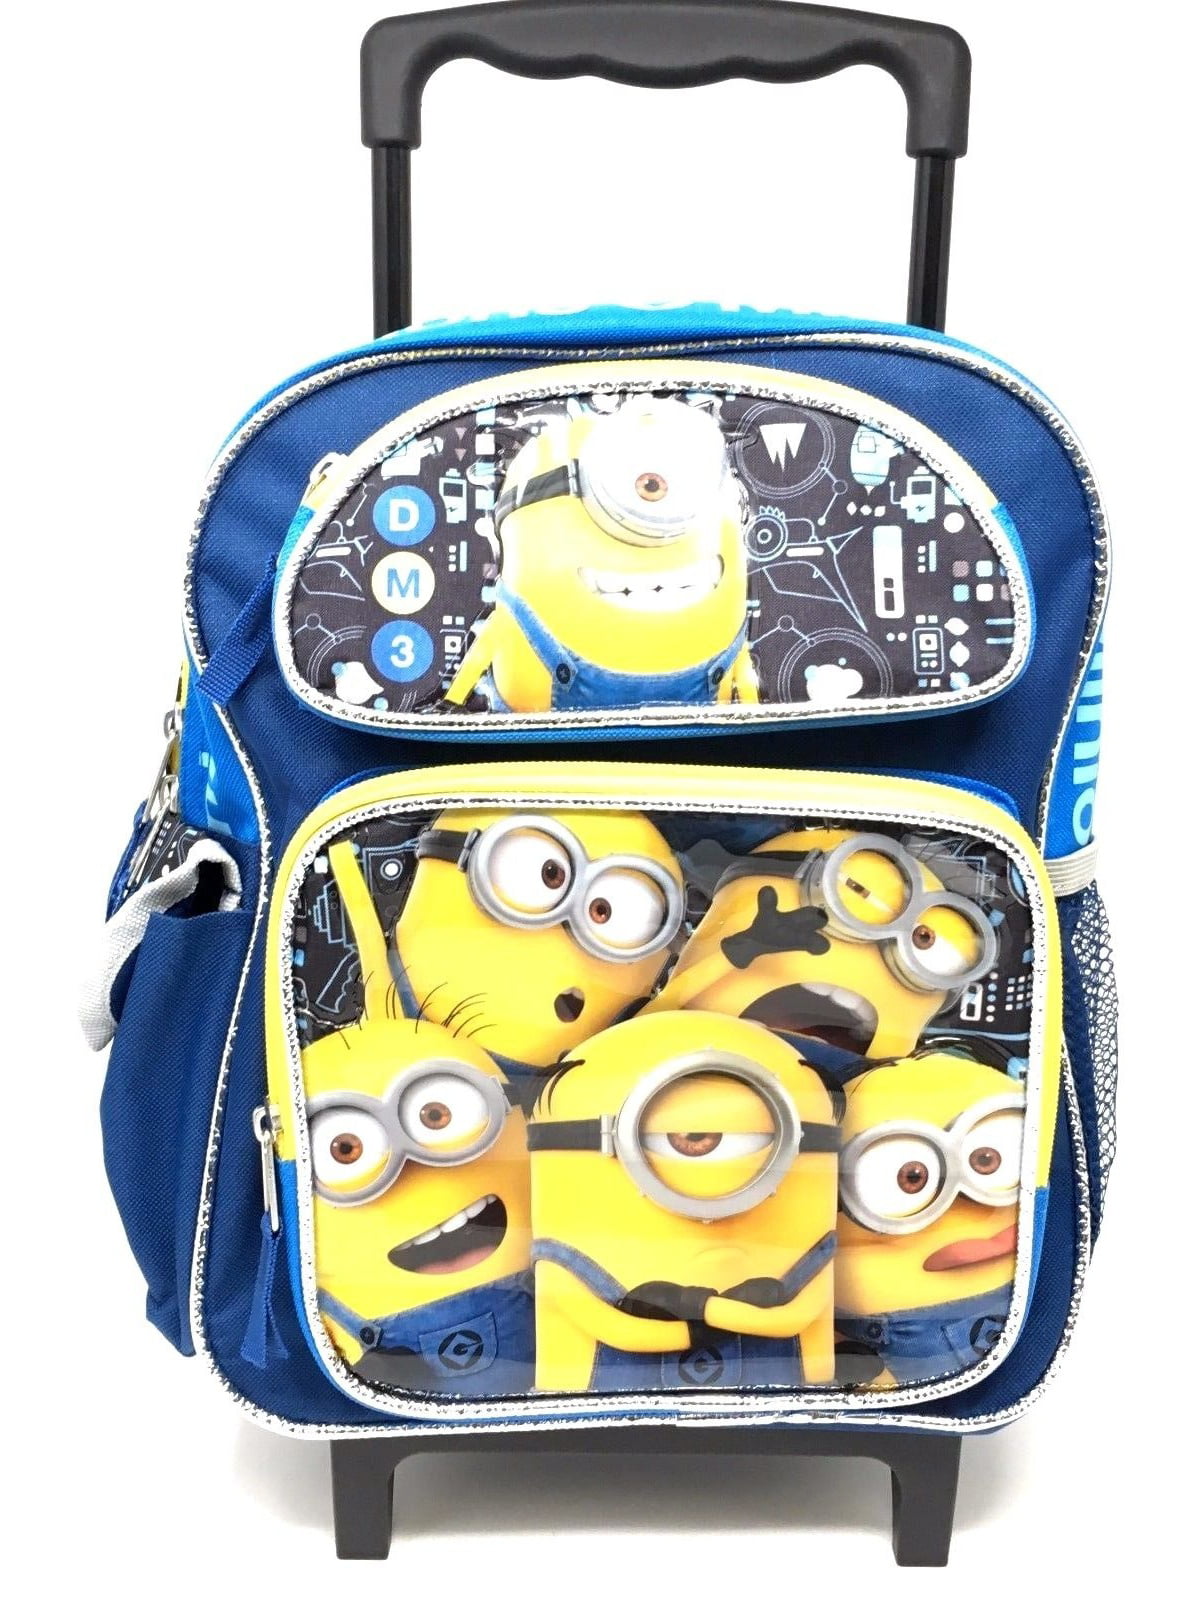 Despicable Me 3 Minions Large School Roller Backpack Lunch Bag 2pc Set Movie 